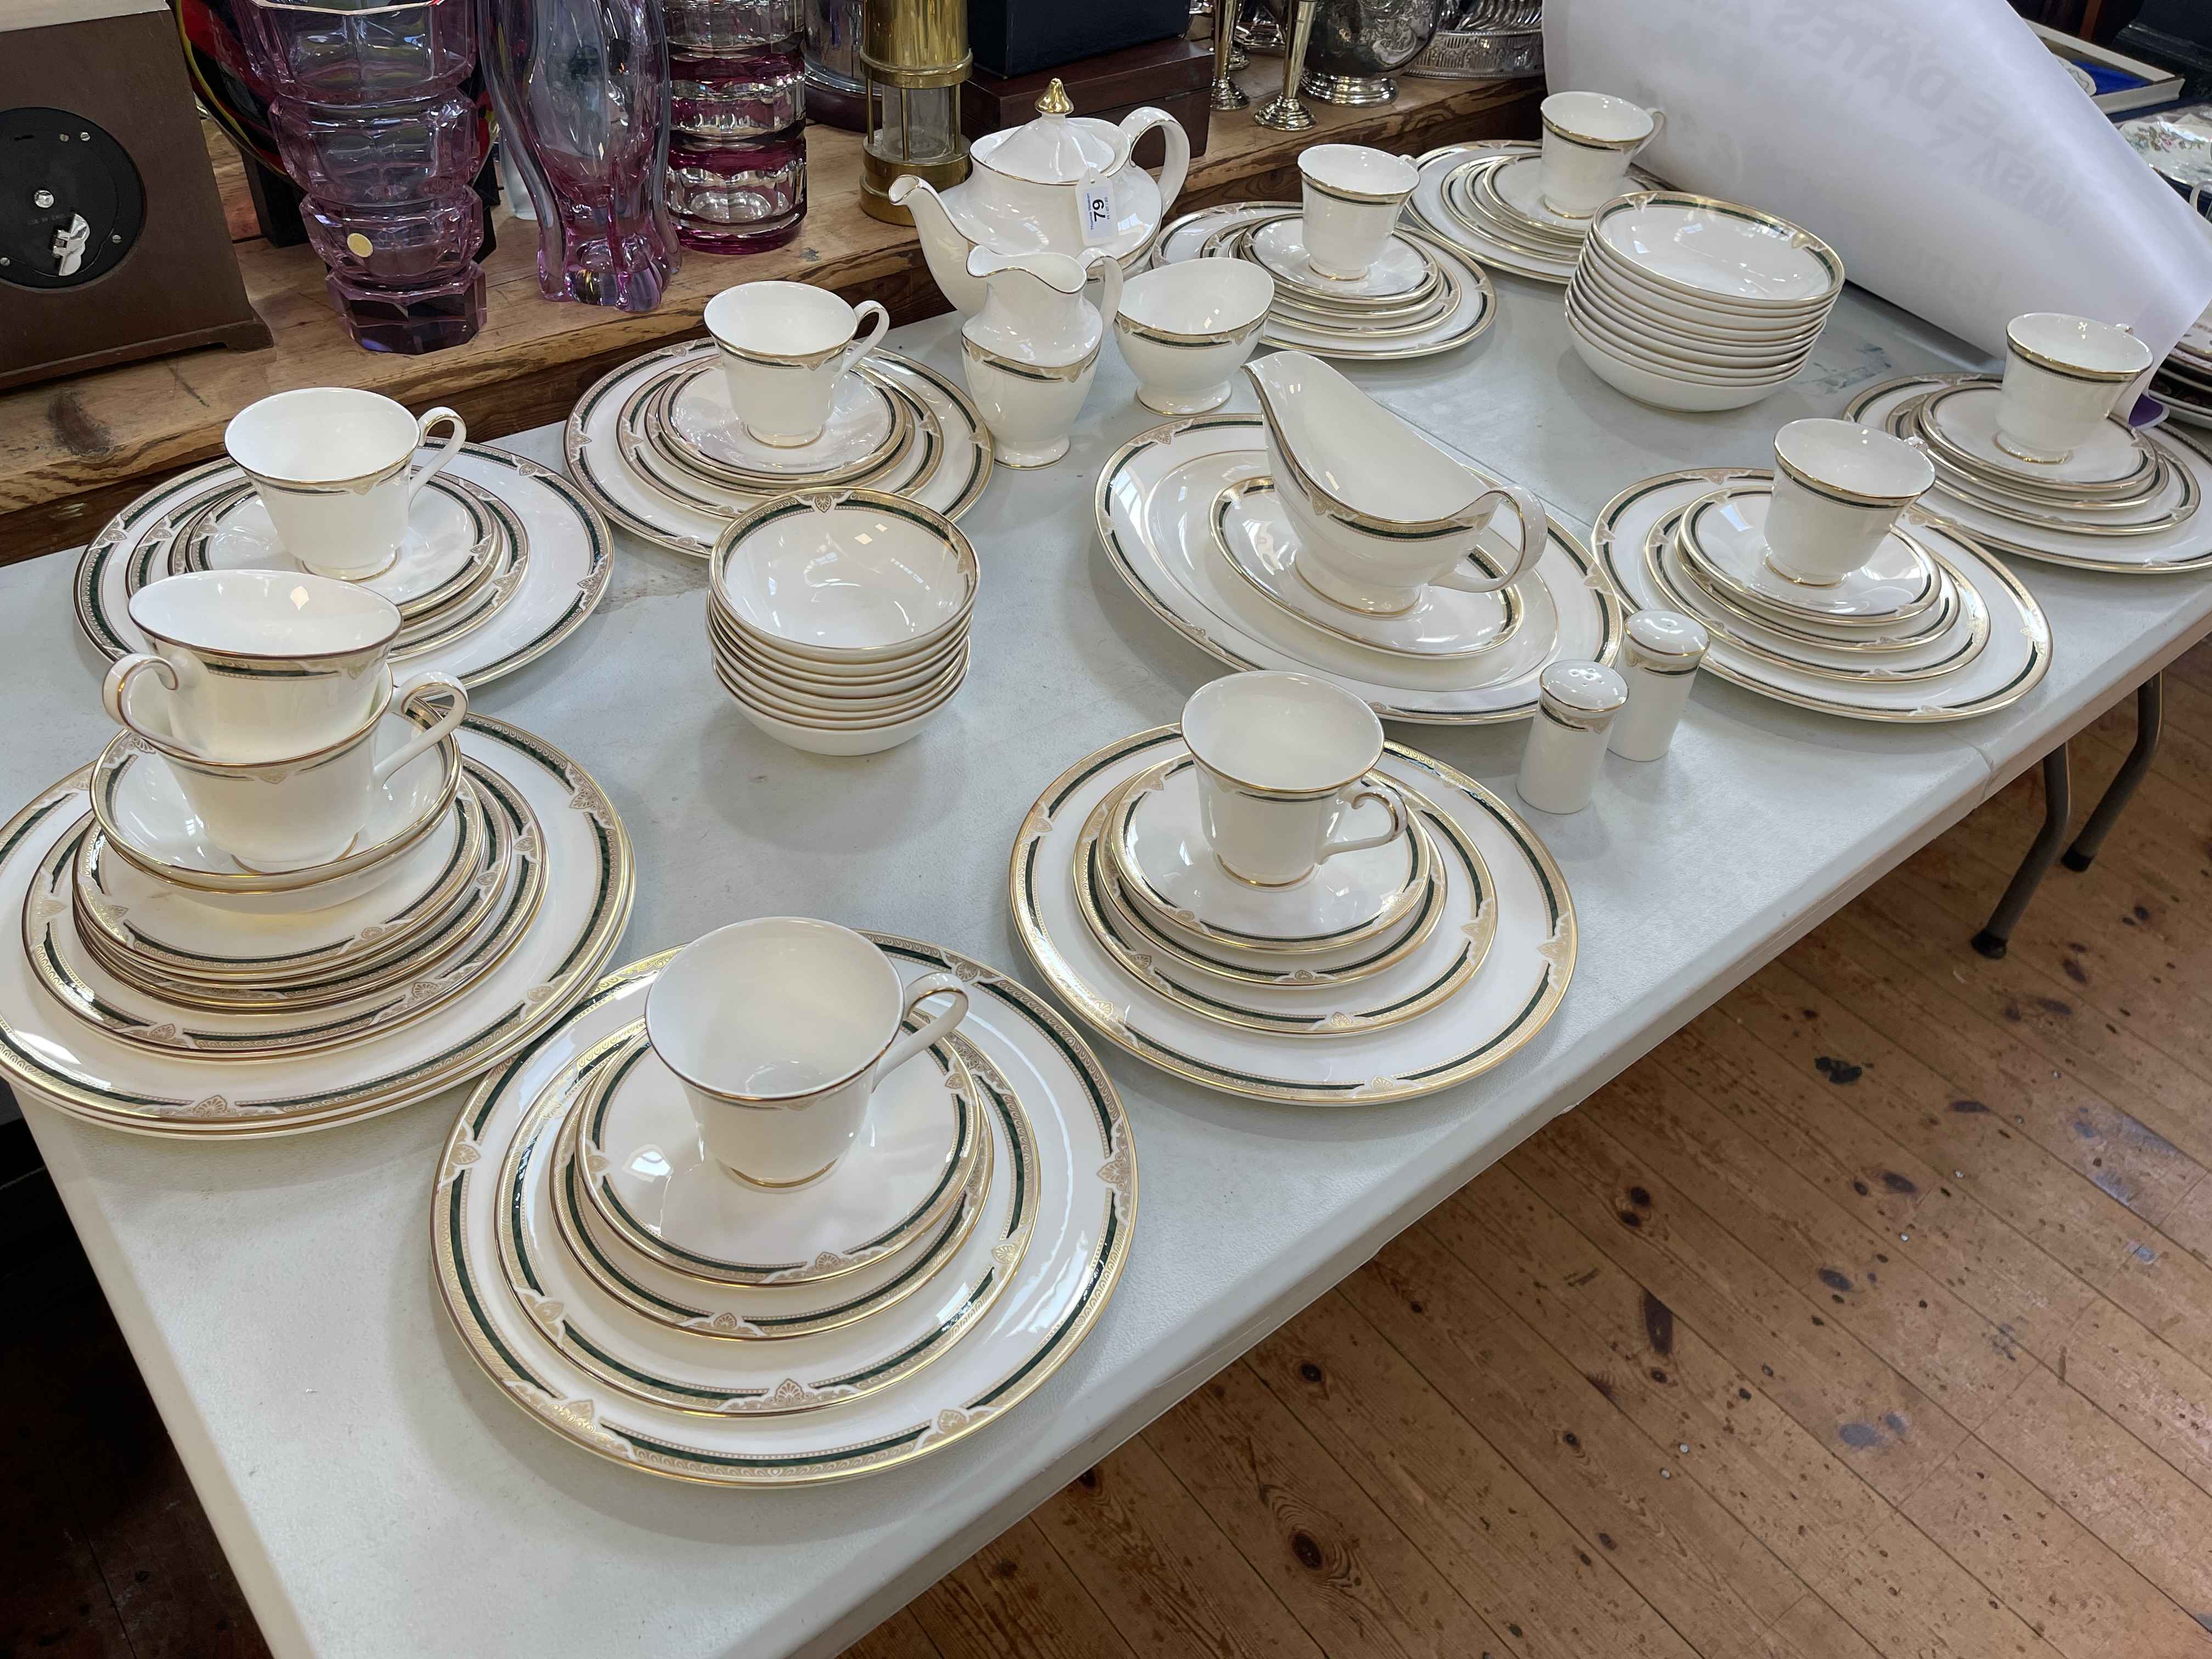 Royal Doulton Forsyth table service and additional duplicate seconds, approximately 75 pieces.